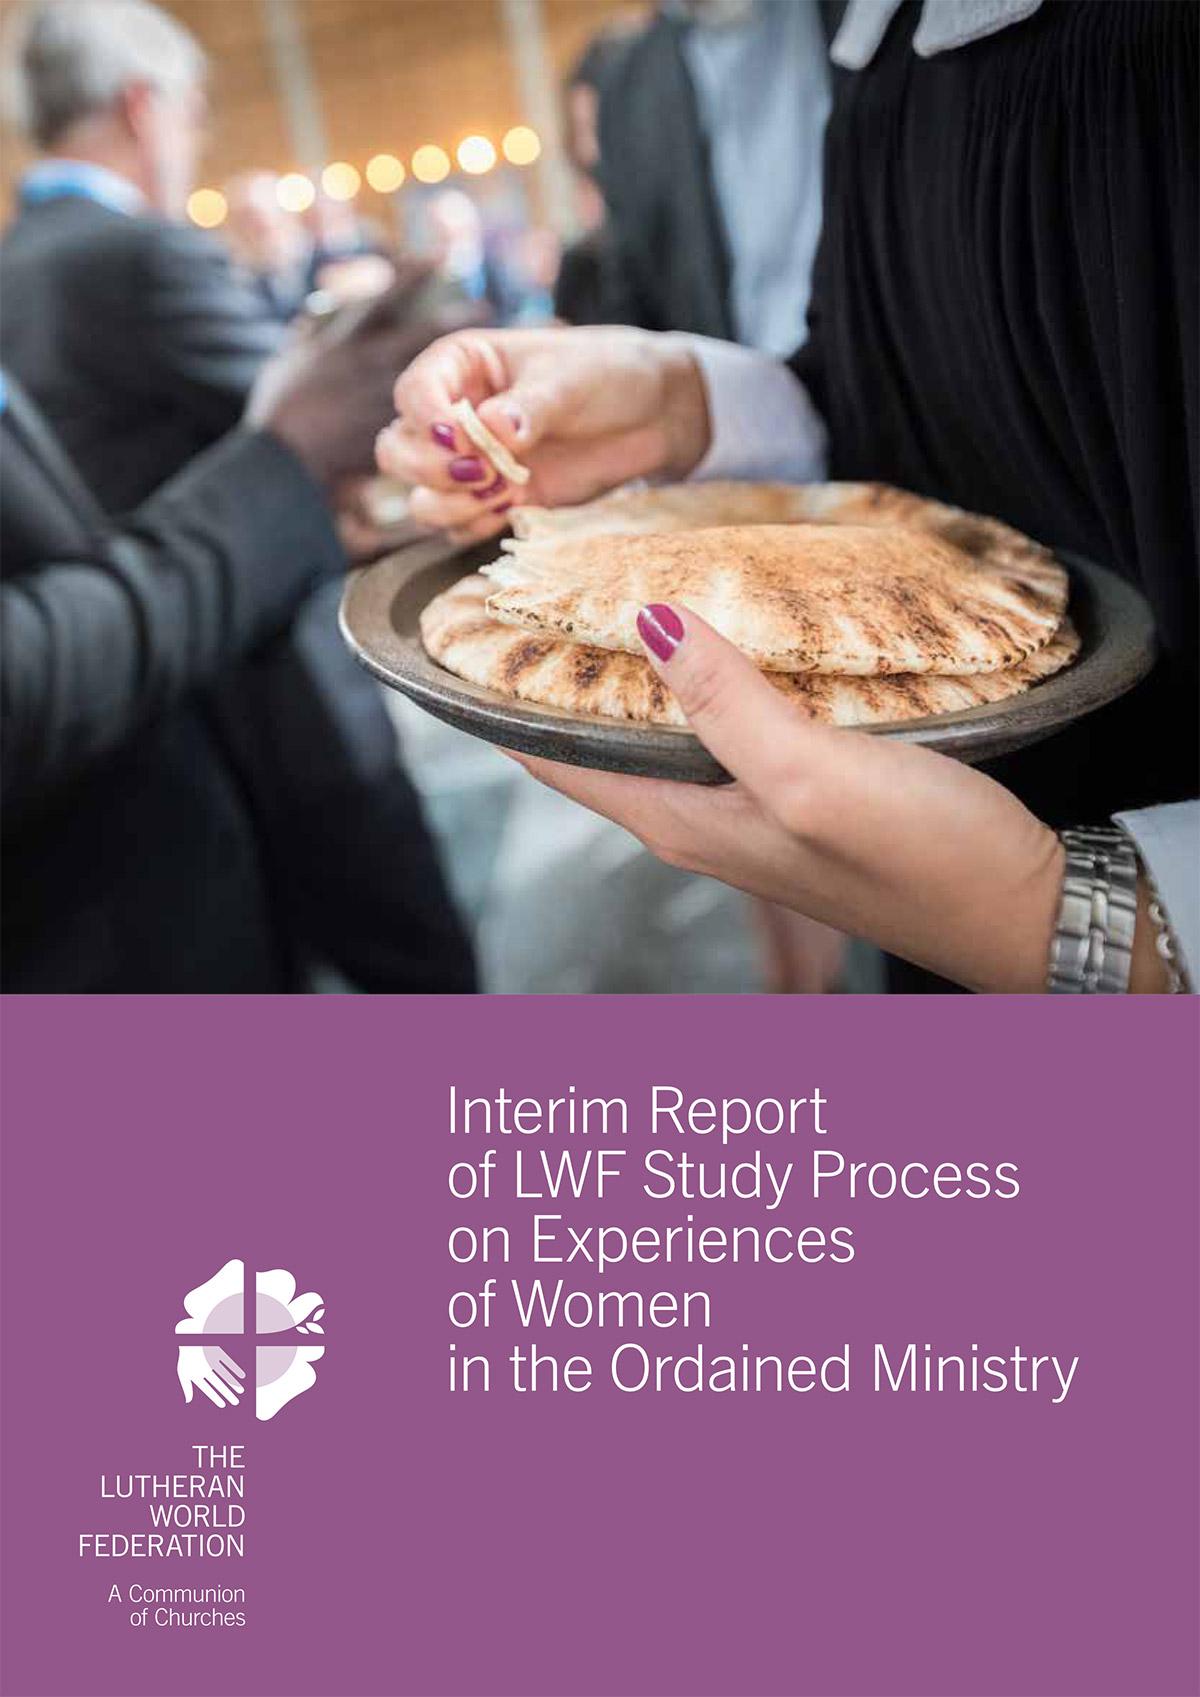 Interim Report of LWF Study Process on Experiences of Women in the Ordained Ministry